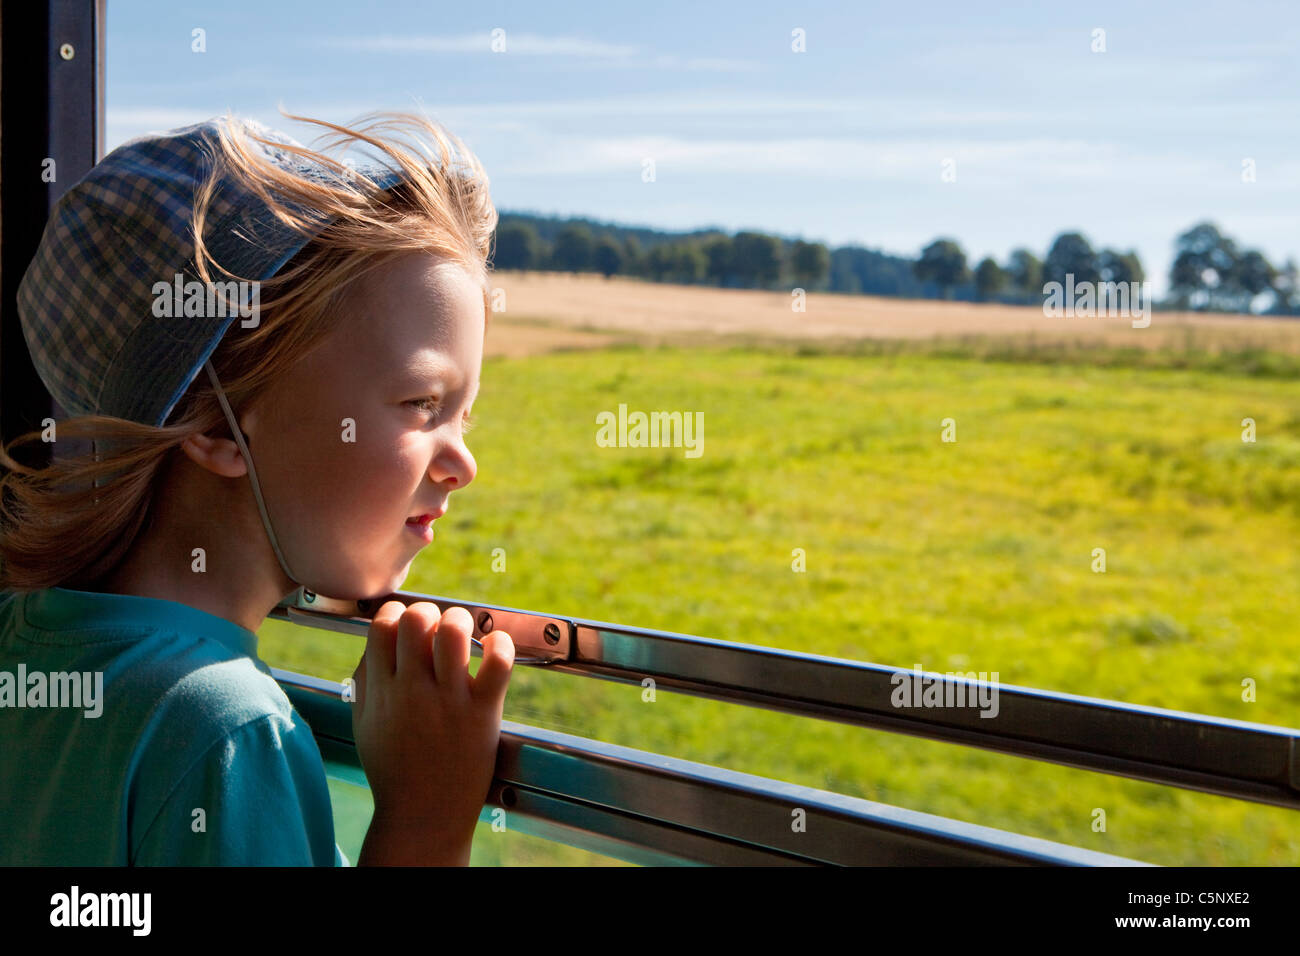 boy with long blond hair and hat looking out the train window Stock Photo